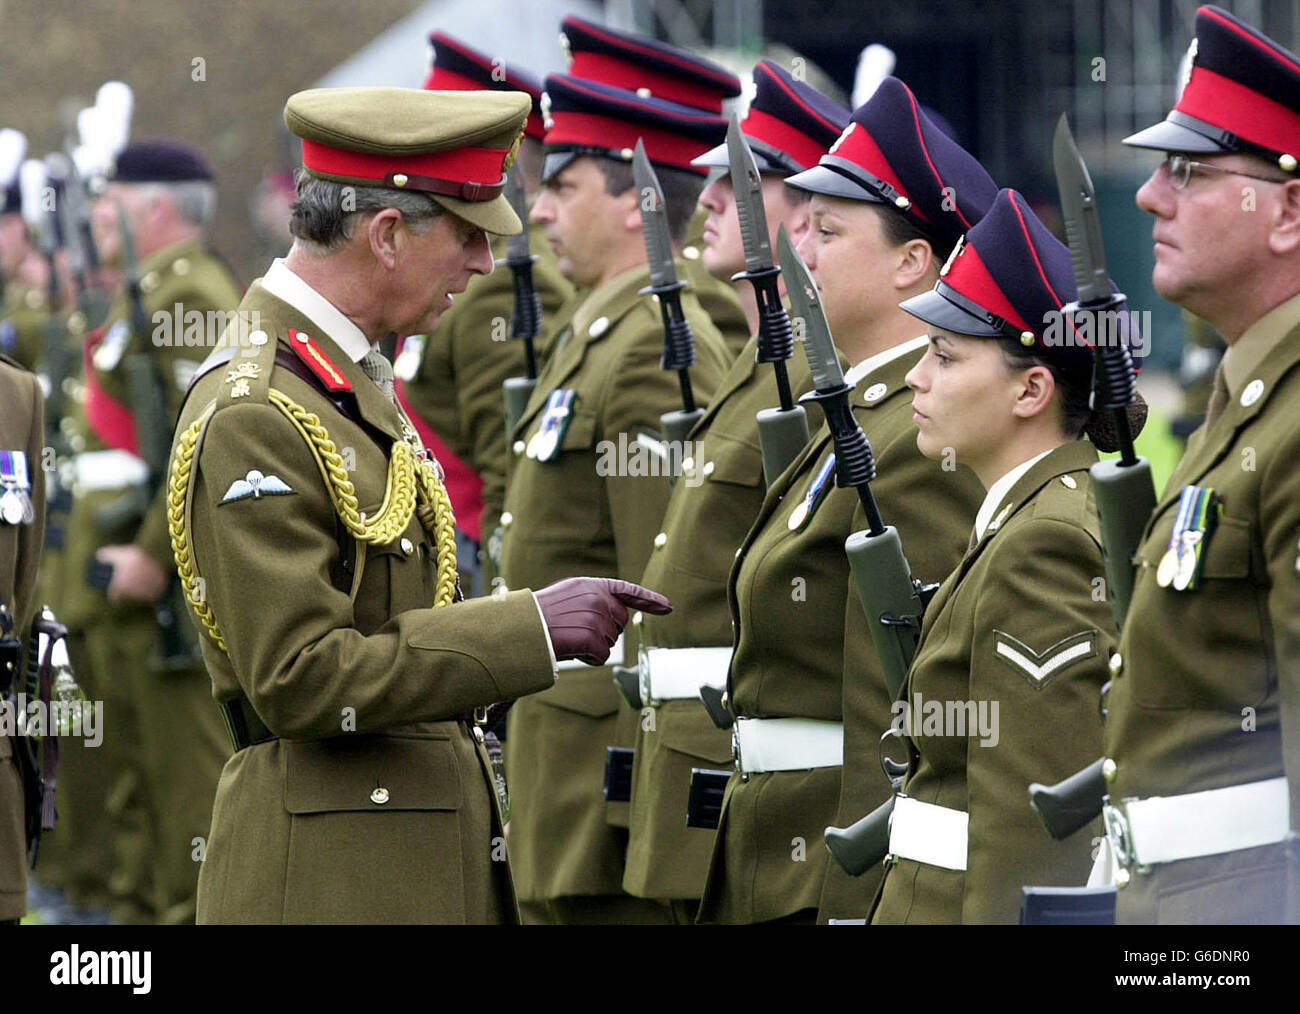 The Prince of Wales reviews the troops during the Royal Welsh Regiment ceremony at Cardiff Castle, where he presented the new Sovereign's Colours to the regiment. Stock Photo